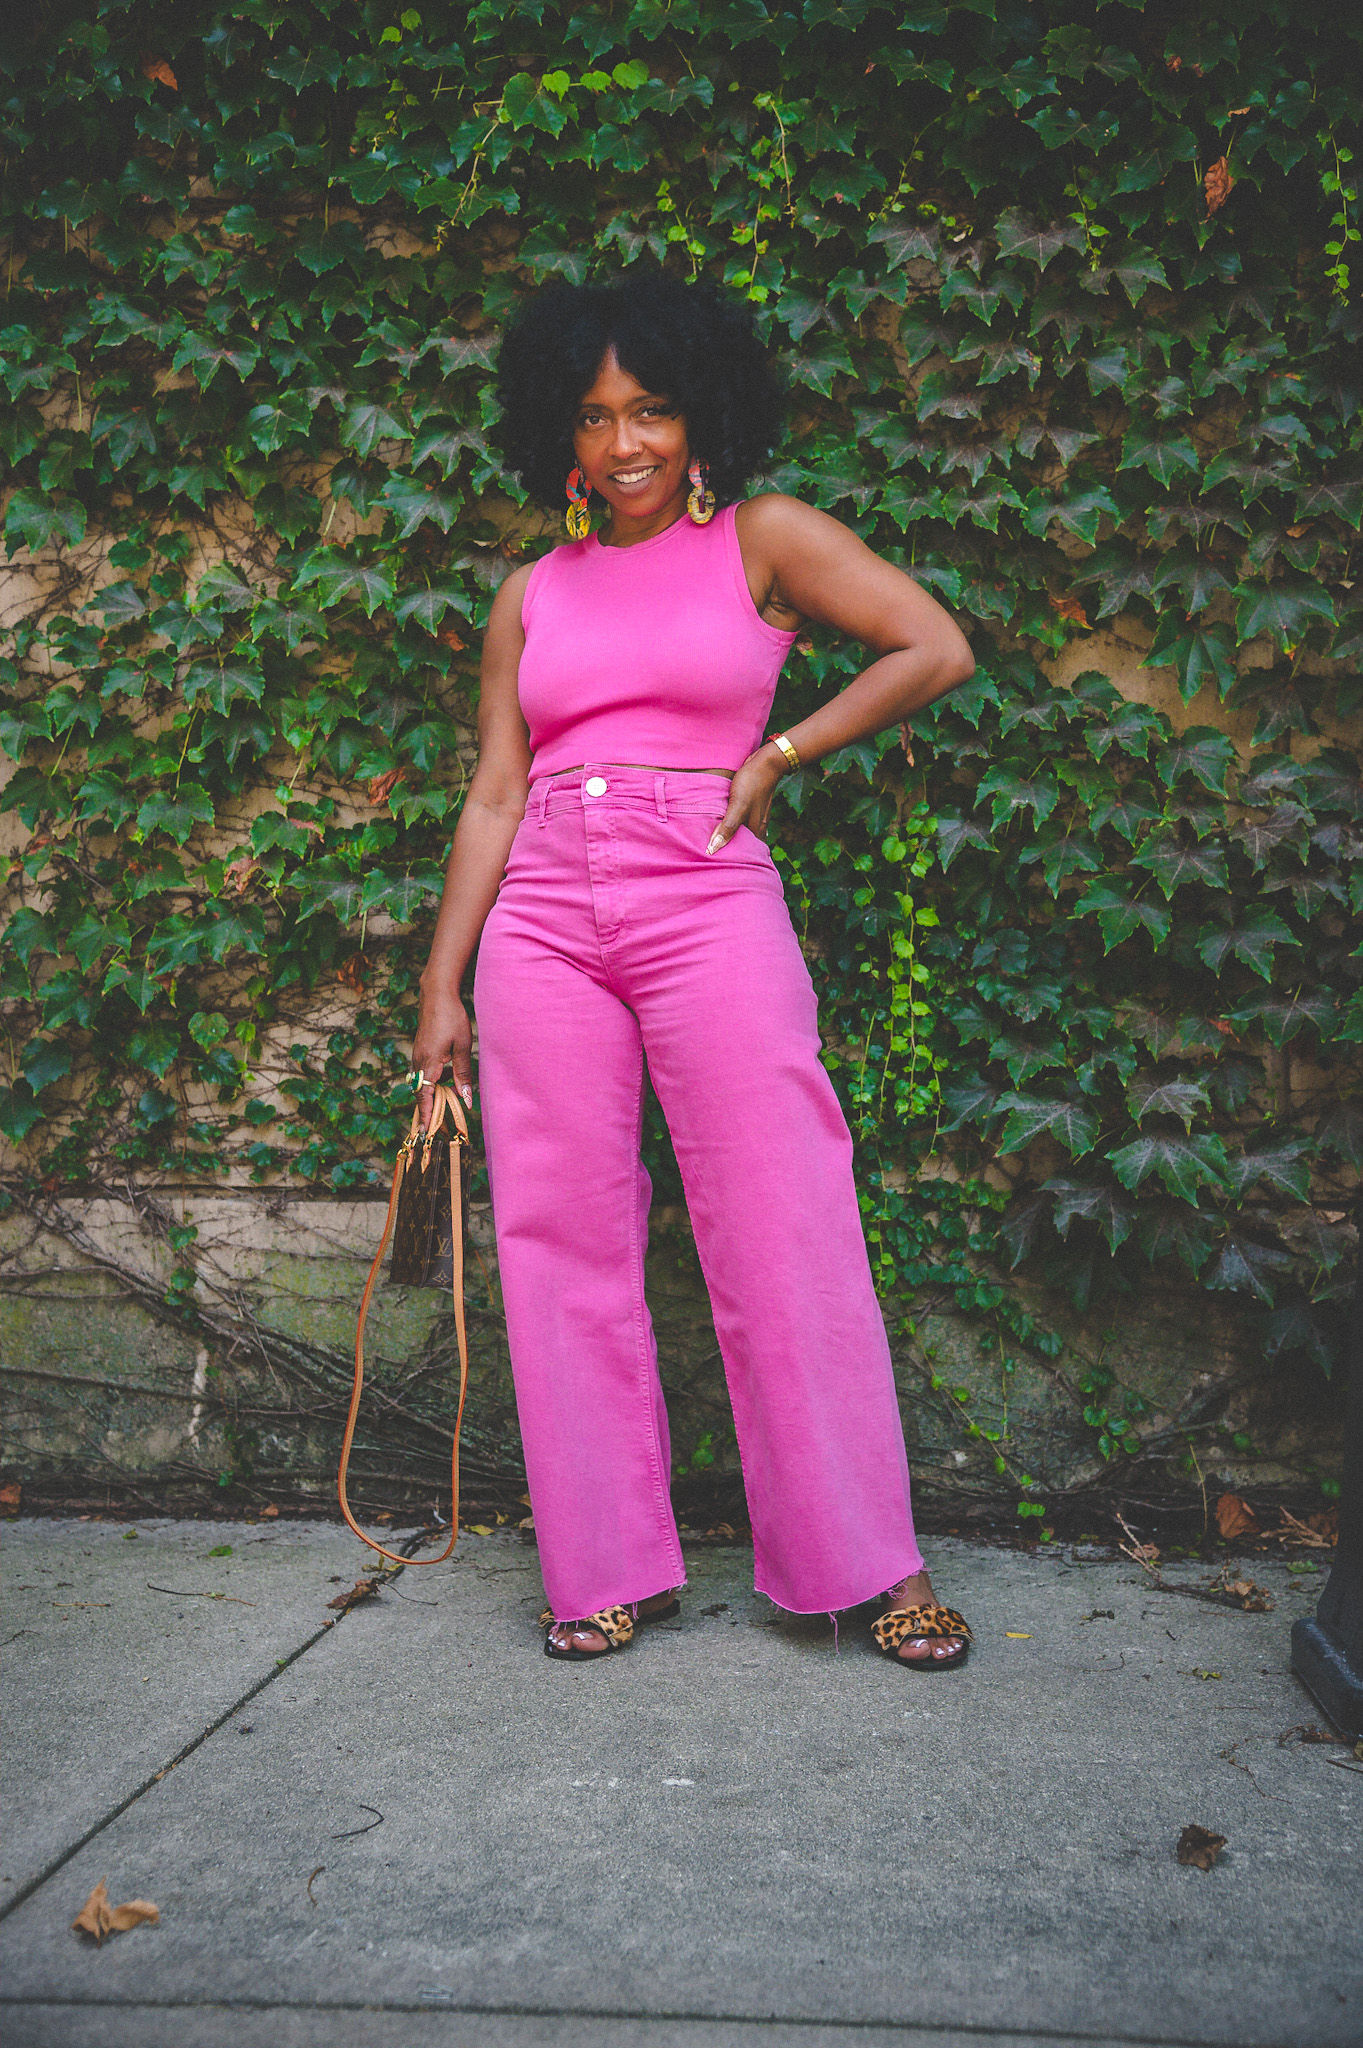 SWEENEE STYLE, INDIANAPOLIS FASHION, OOTD, ZARA OUTFIT OF THE DAY, SUMMER OUTFIT IDEAS, BLACK GIRLS WHO BLOG, INDIANA STYLE BLOG, FASHION BLOG, ZARA